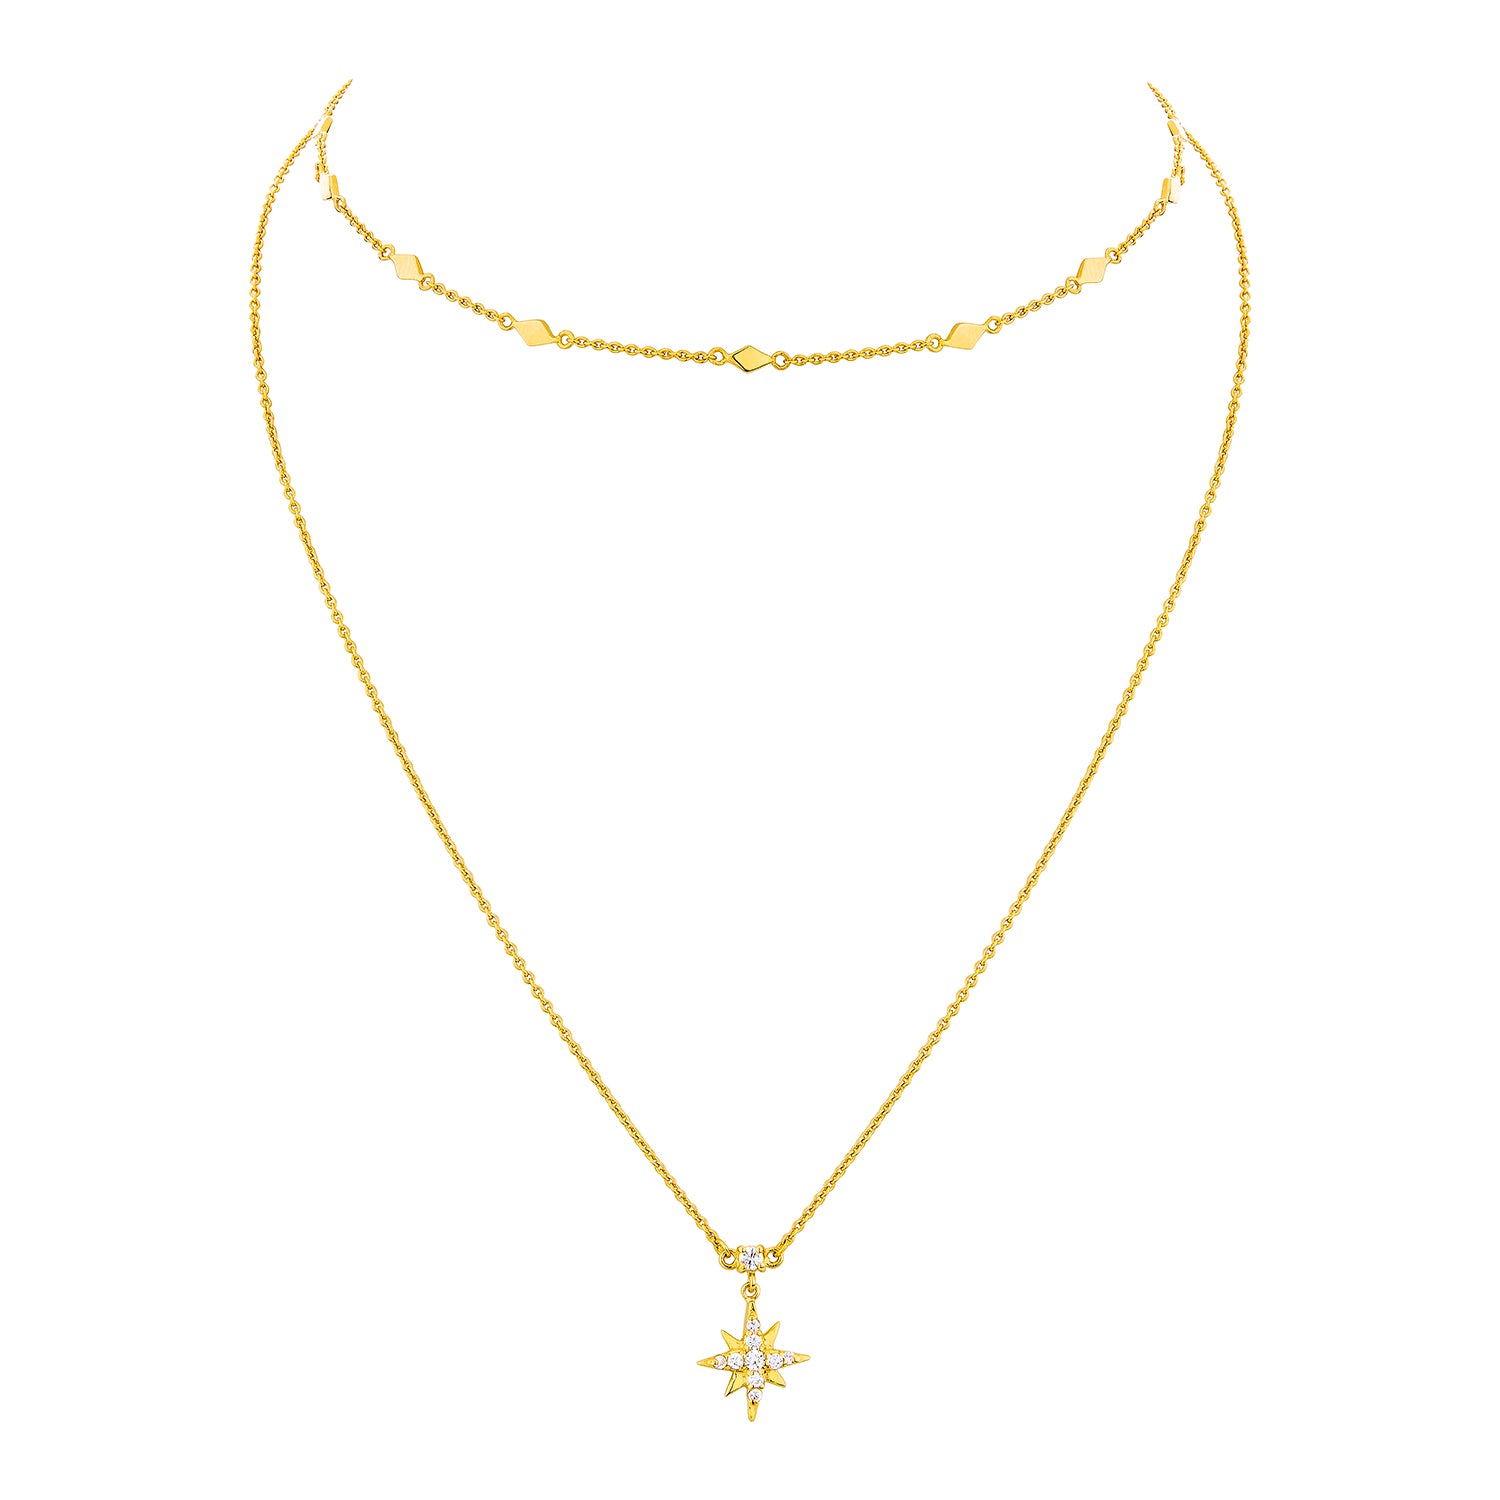 Celestial Double Chain Necklace - Gold